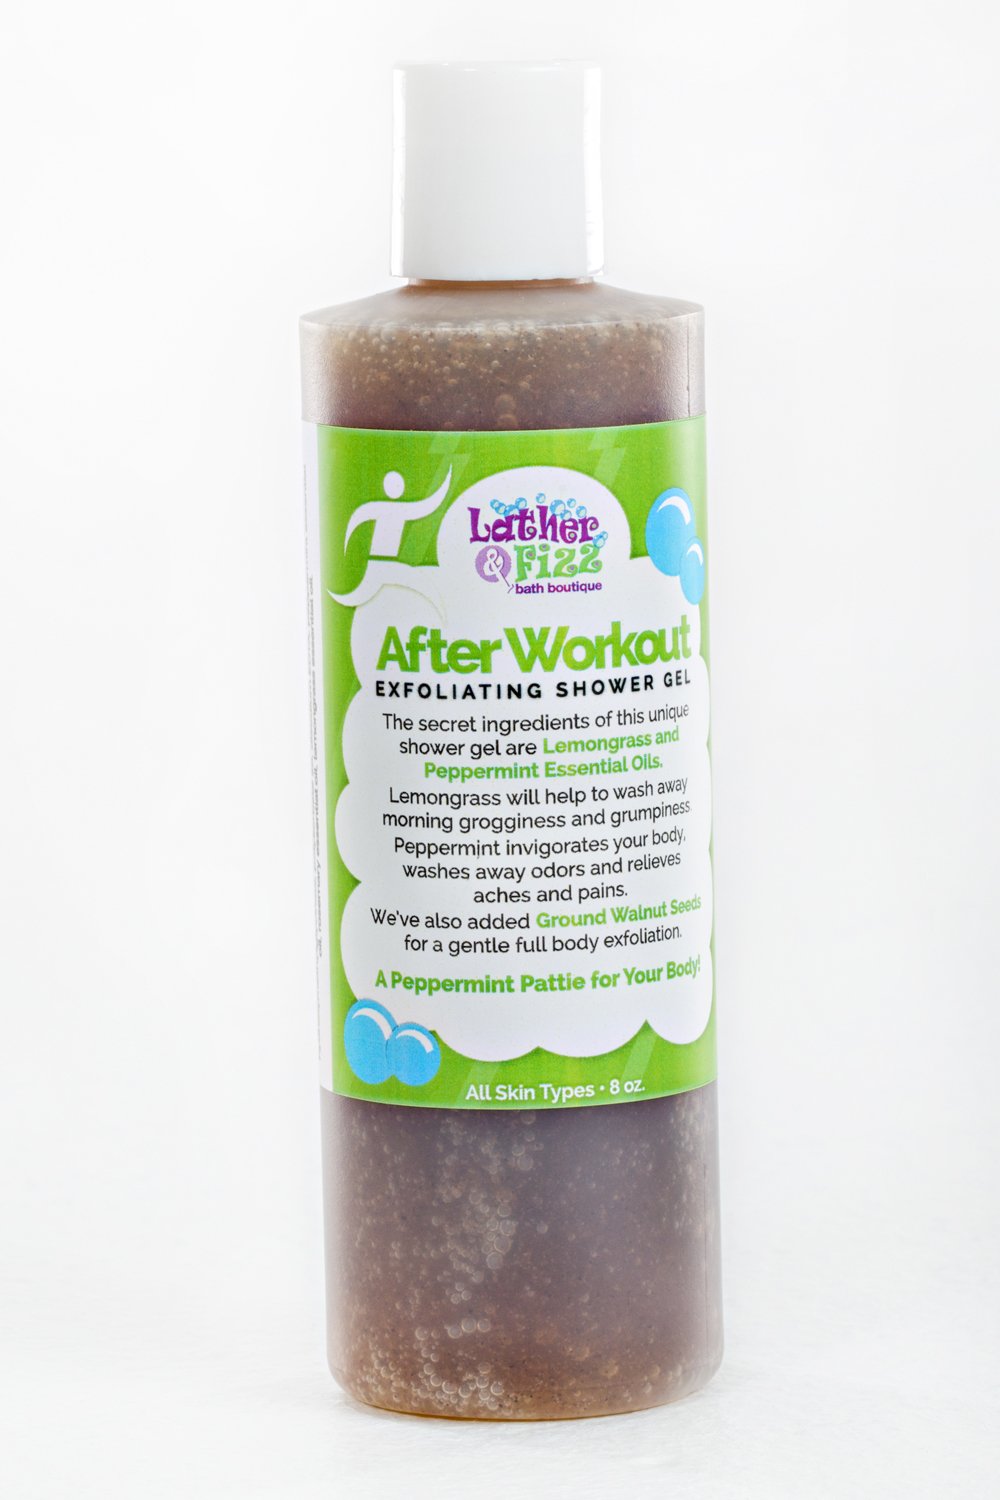 After Workout Exfoliating Shower Gel By Lather & Fizz